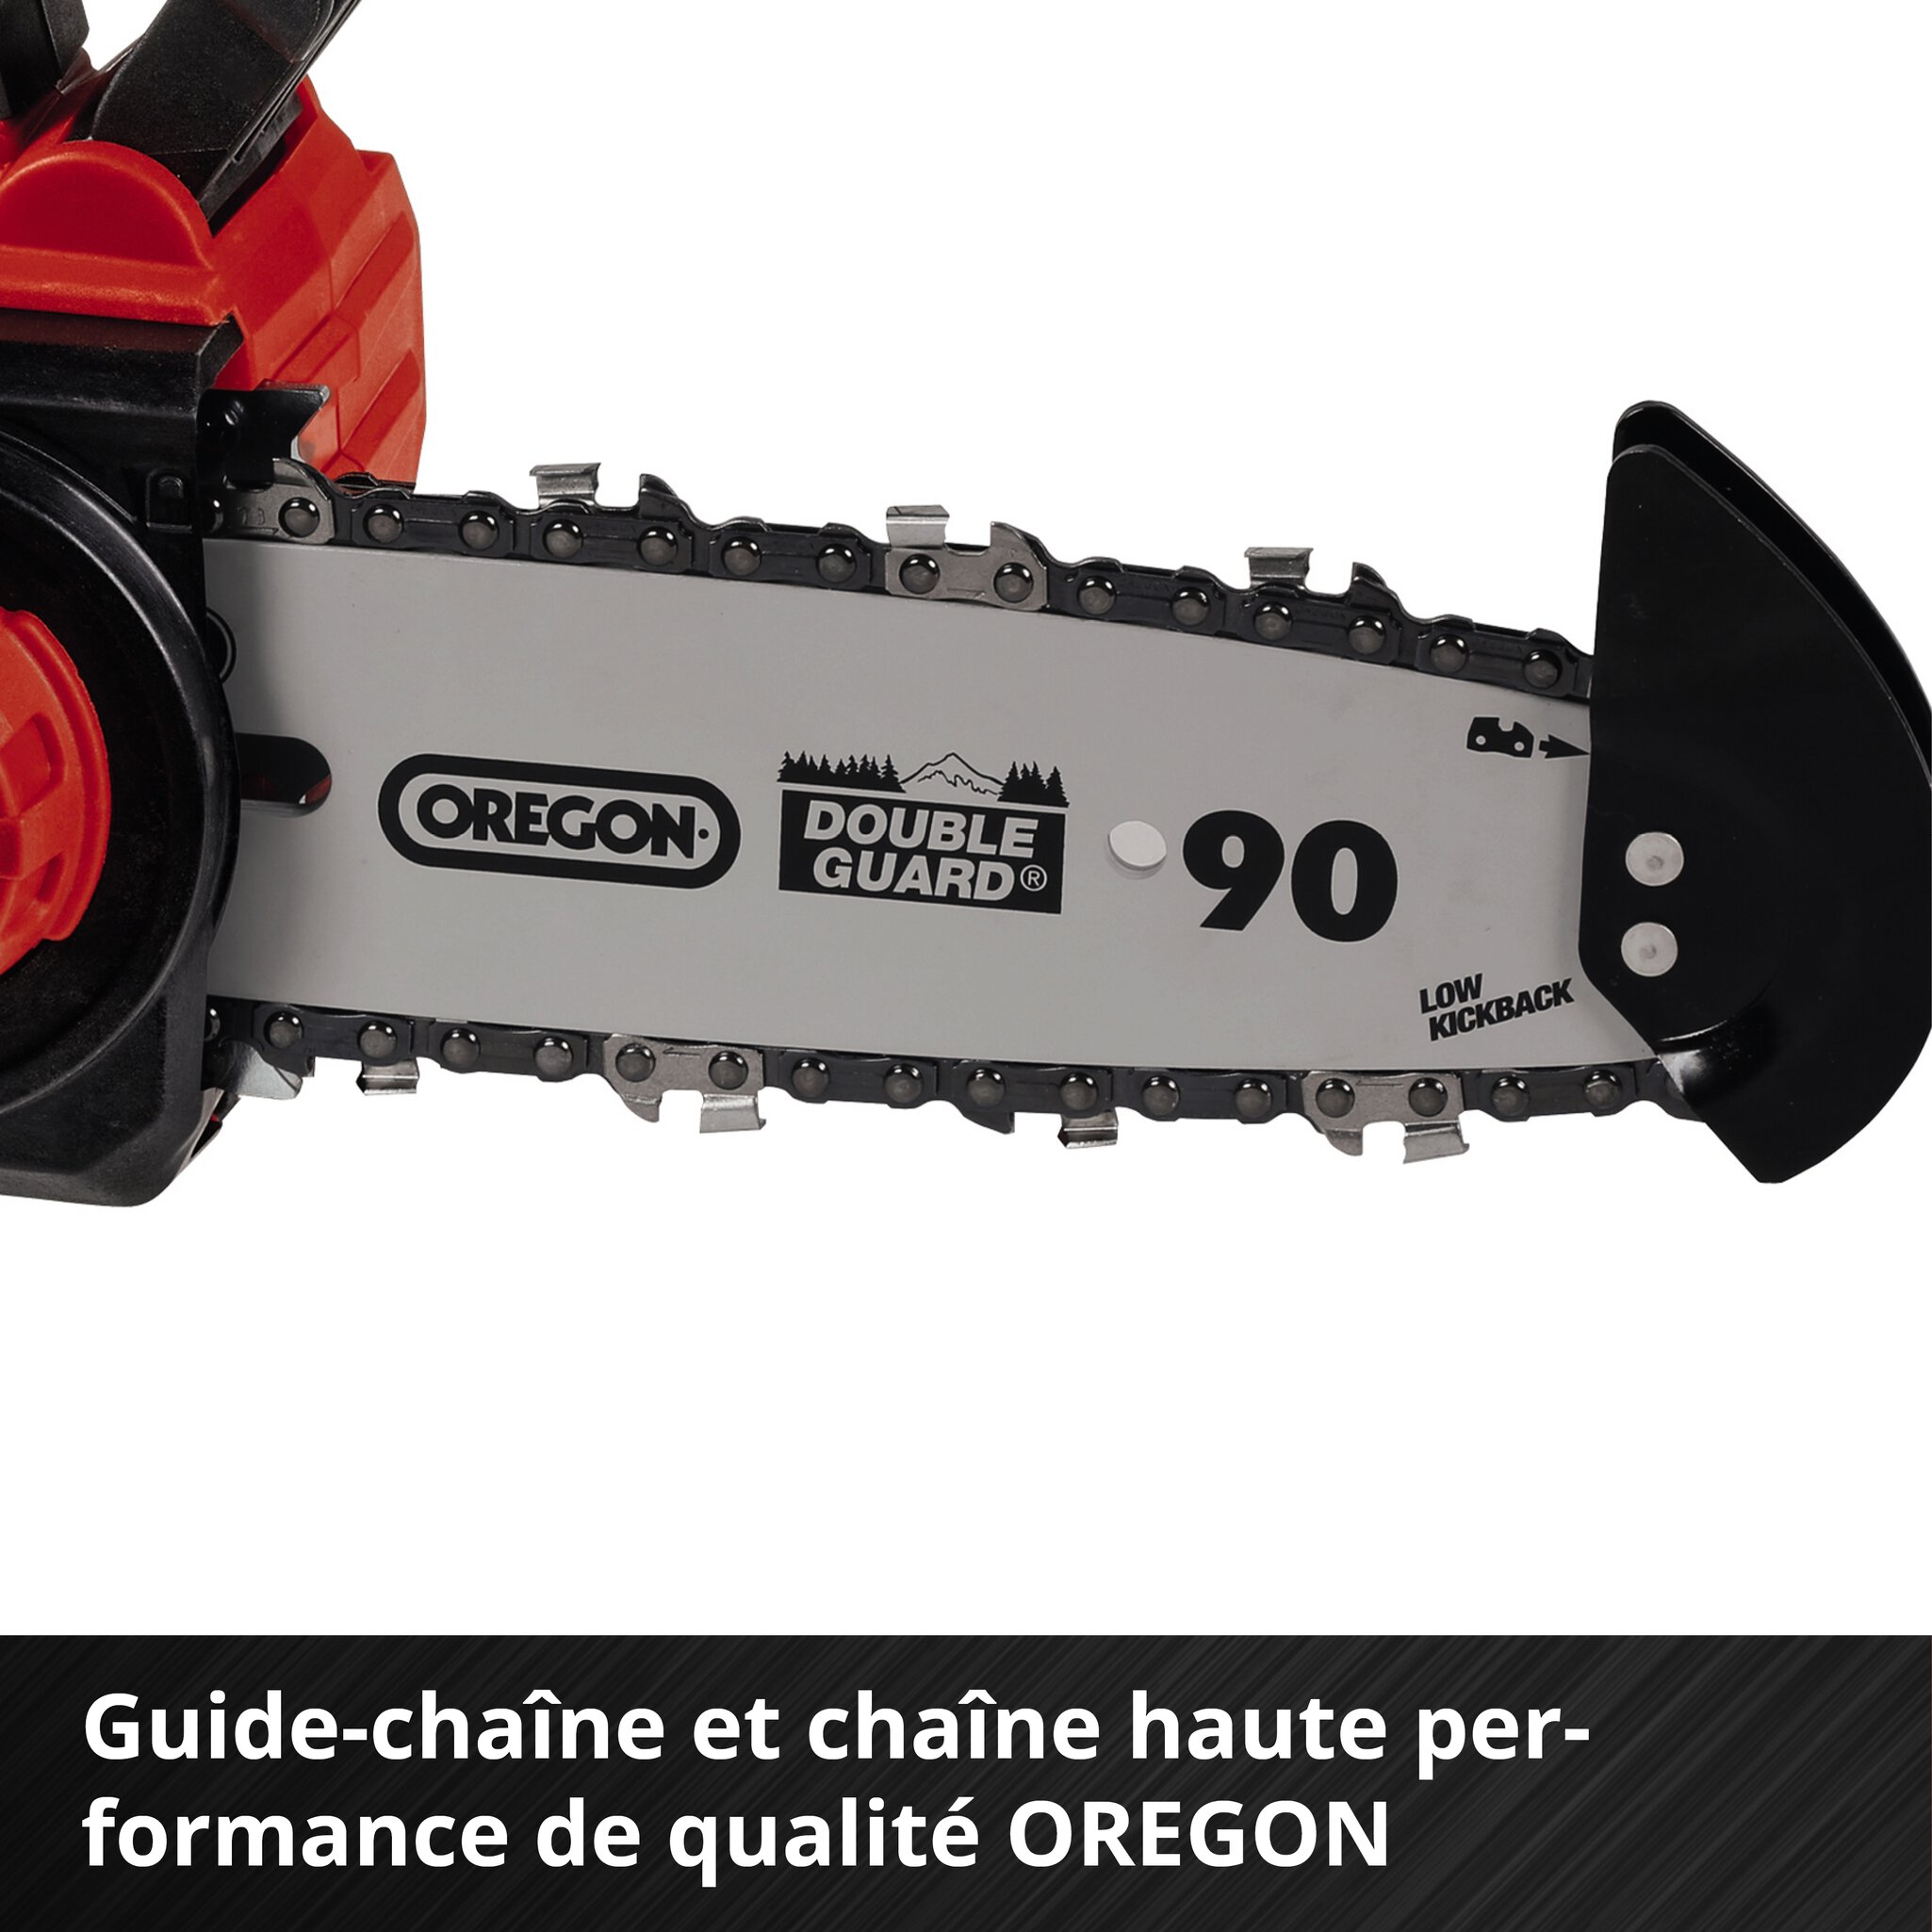 einhell-professional-top-handled-cordless-chain-saw-4600020-detail_image-006